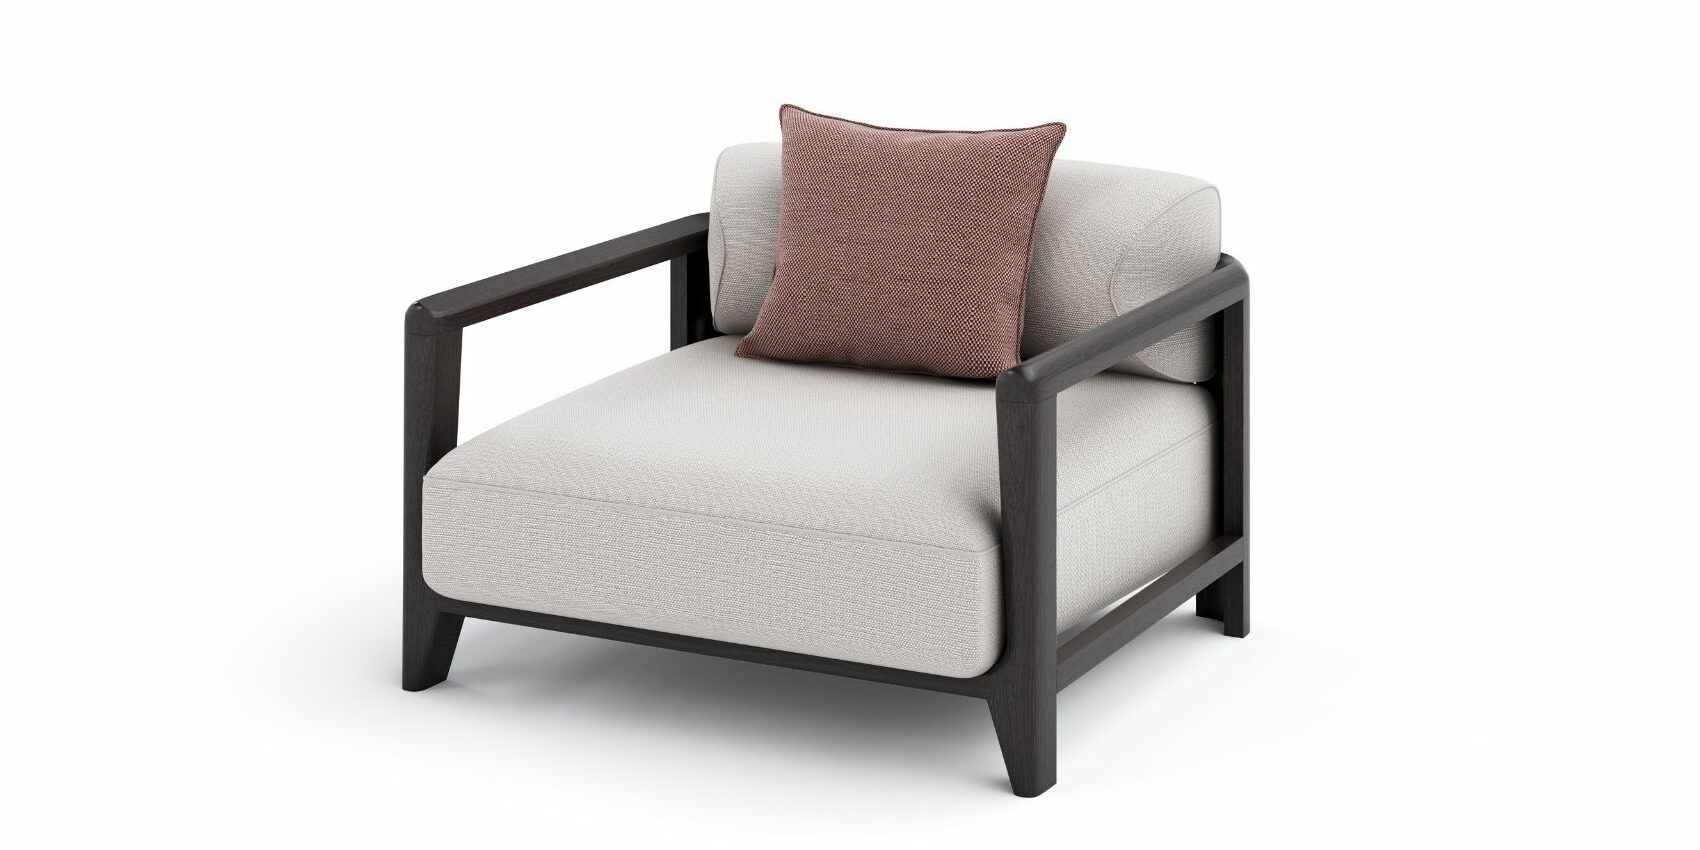 Folie Middle Chair in Outdoor Chairs for Folie collection